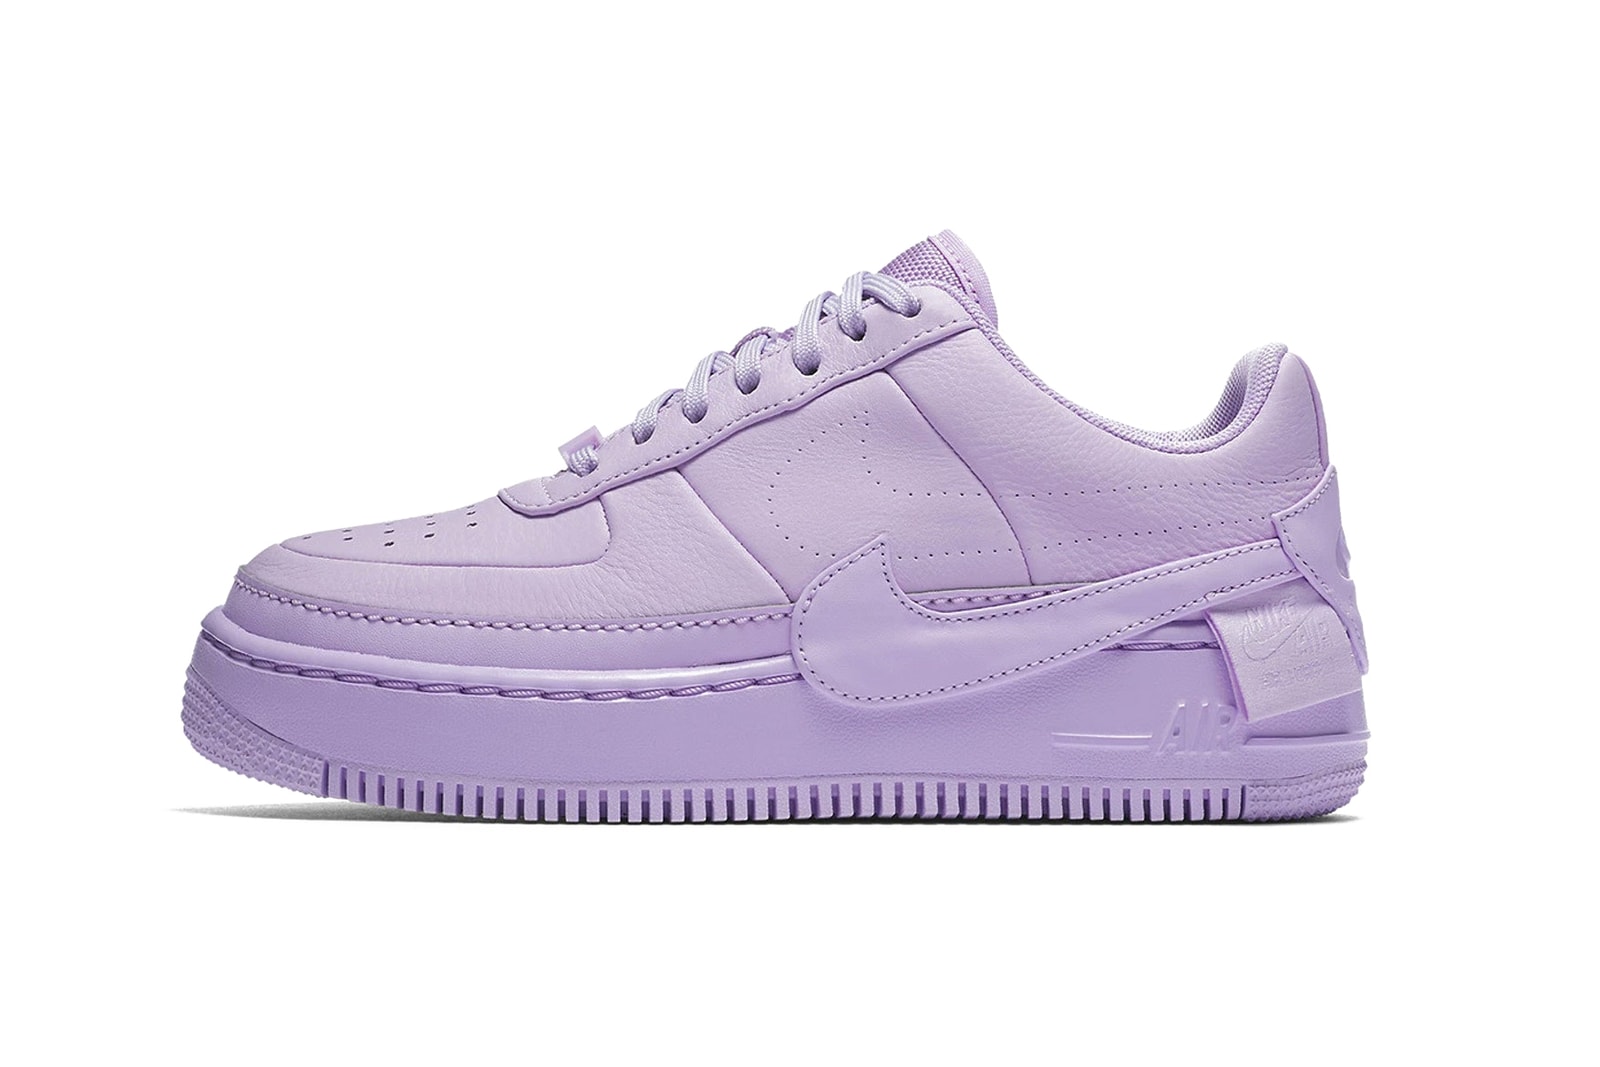 Nike Air Force 1 Purple: The Bold and Fun Sneaker for Any Outfit